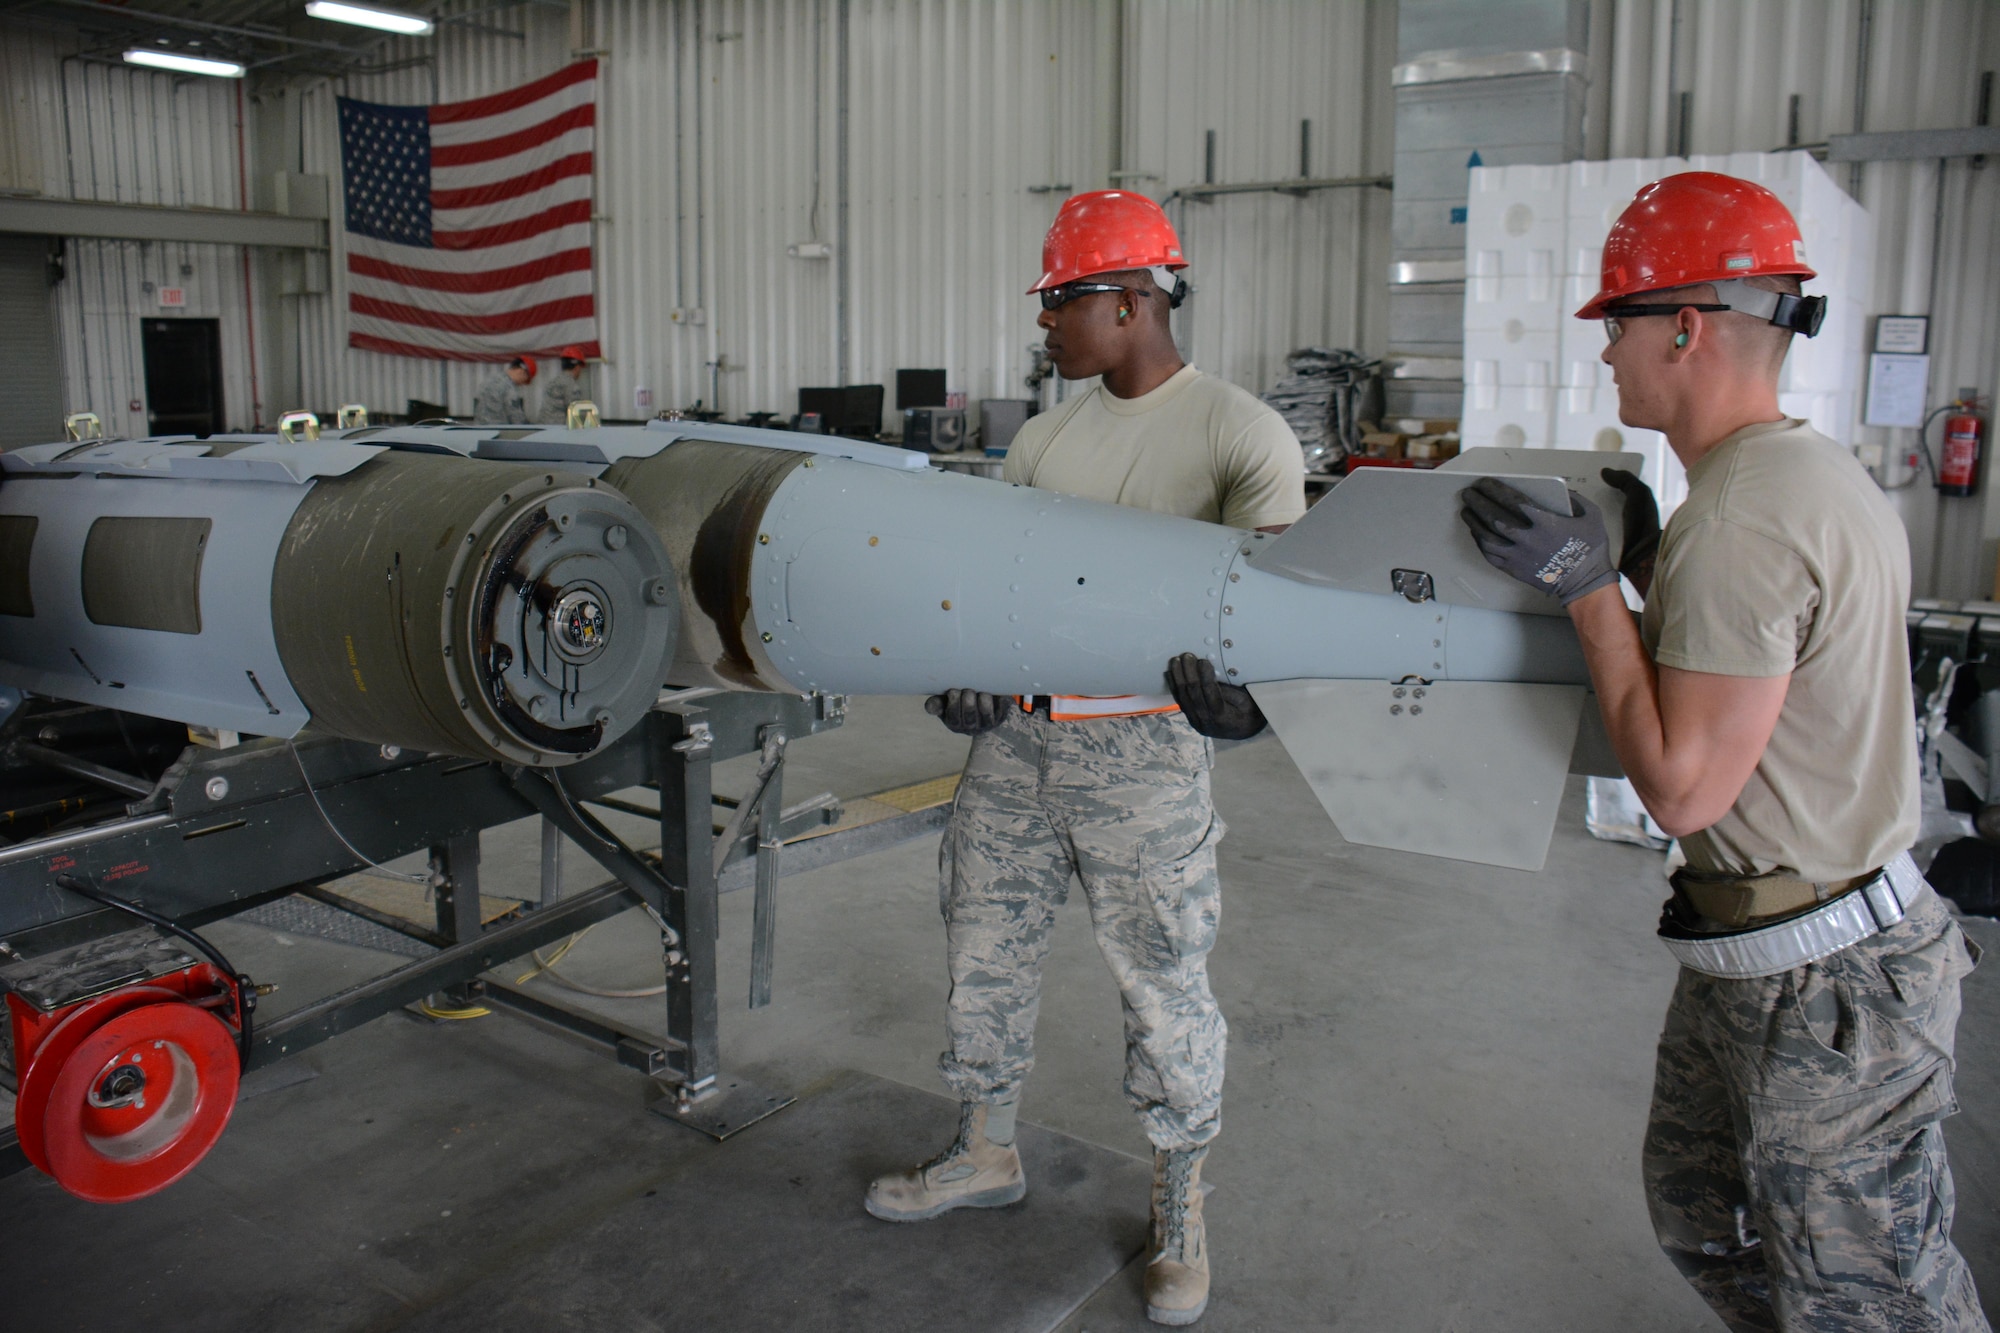 Senior Airman Christopher Haynesorth (left) and Staff Sgt. Daniel Eisenhart (right) both members of the 379th Expeditionary Maintenance Squadron Munitions Flight, install a tail kit on a 2,000-pound joint attack direct munition at Al Udeid Air Base, Qatar Dec. 17. Eisenhart, a native of Hanover, Pennsylvania, and Haynesworth, a native of Richmond, Virginia, are part of a record-setting munitions team that has built nearly 4,000 bombs since July 2015. (U.S. Air Force photo by Tech. Sgt. James Hodgman/Released)